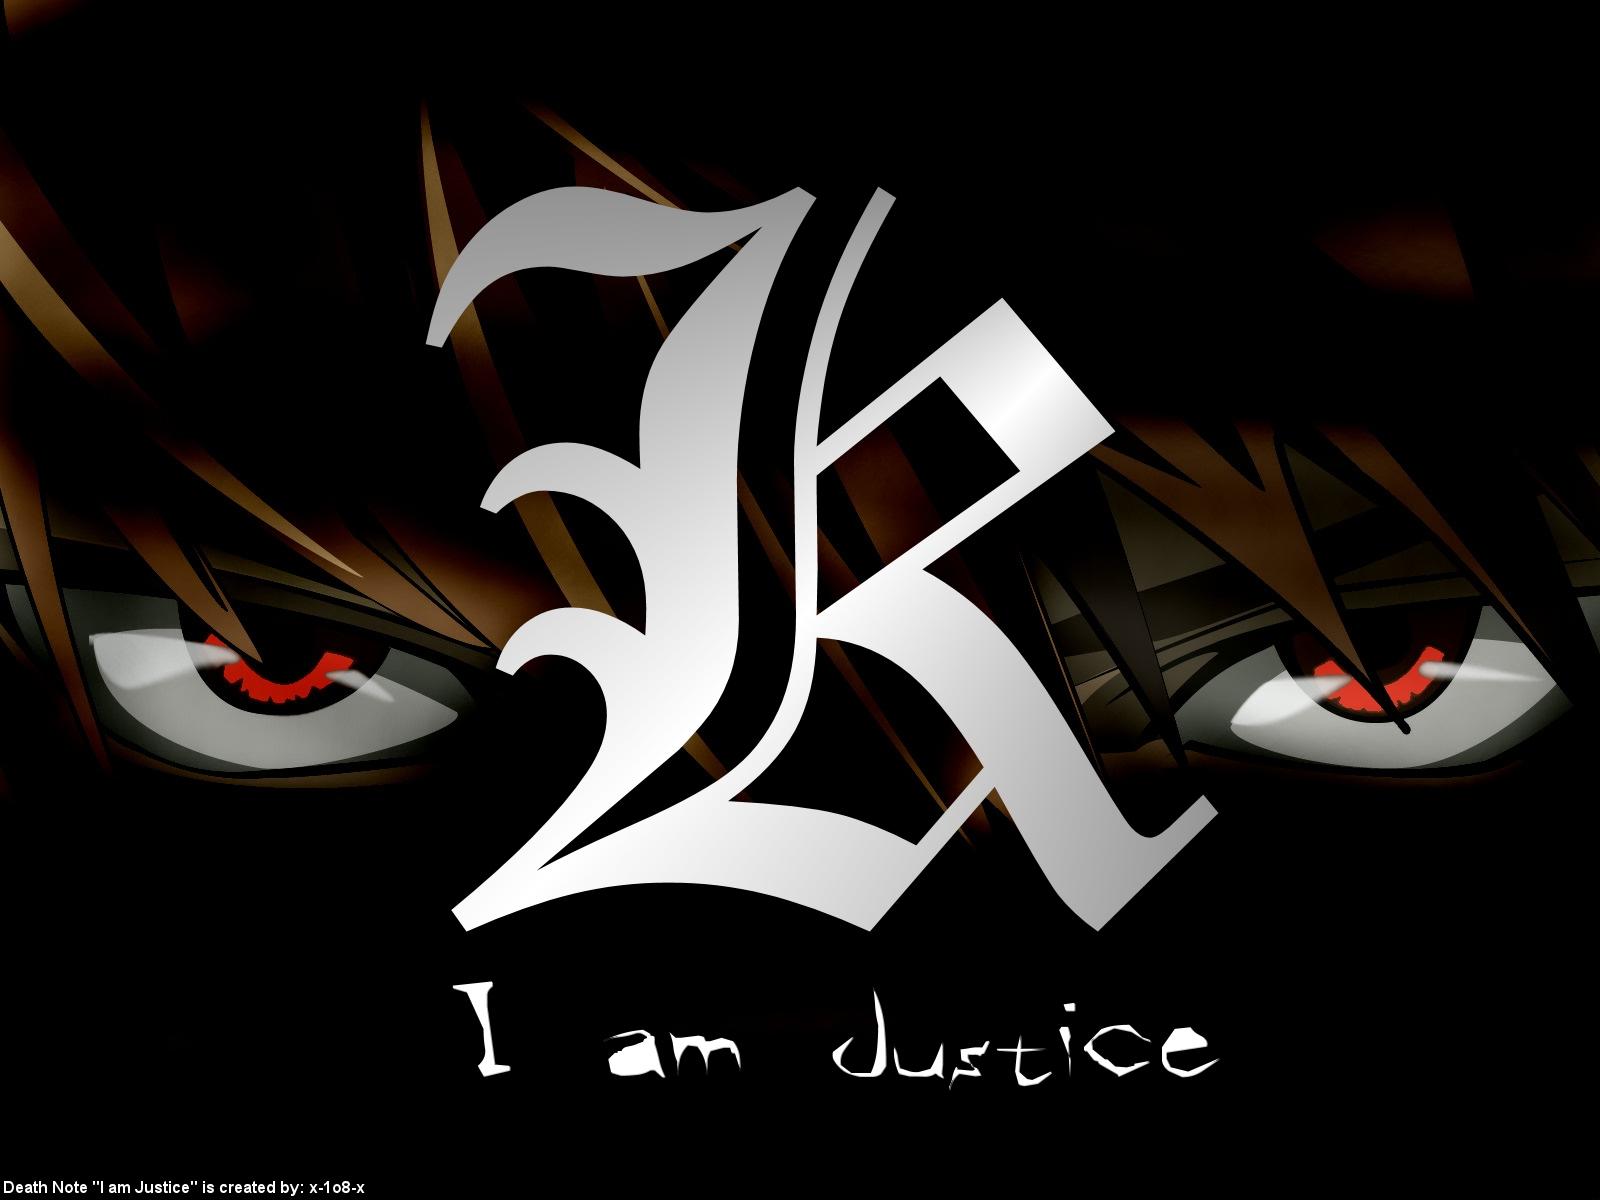 death note yagami light kira High Quality Wallpaper, High Definition